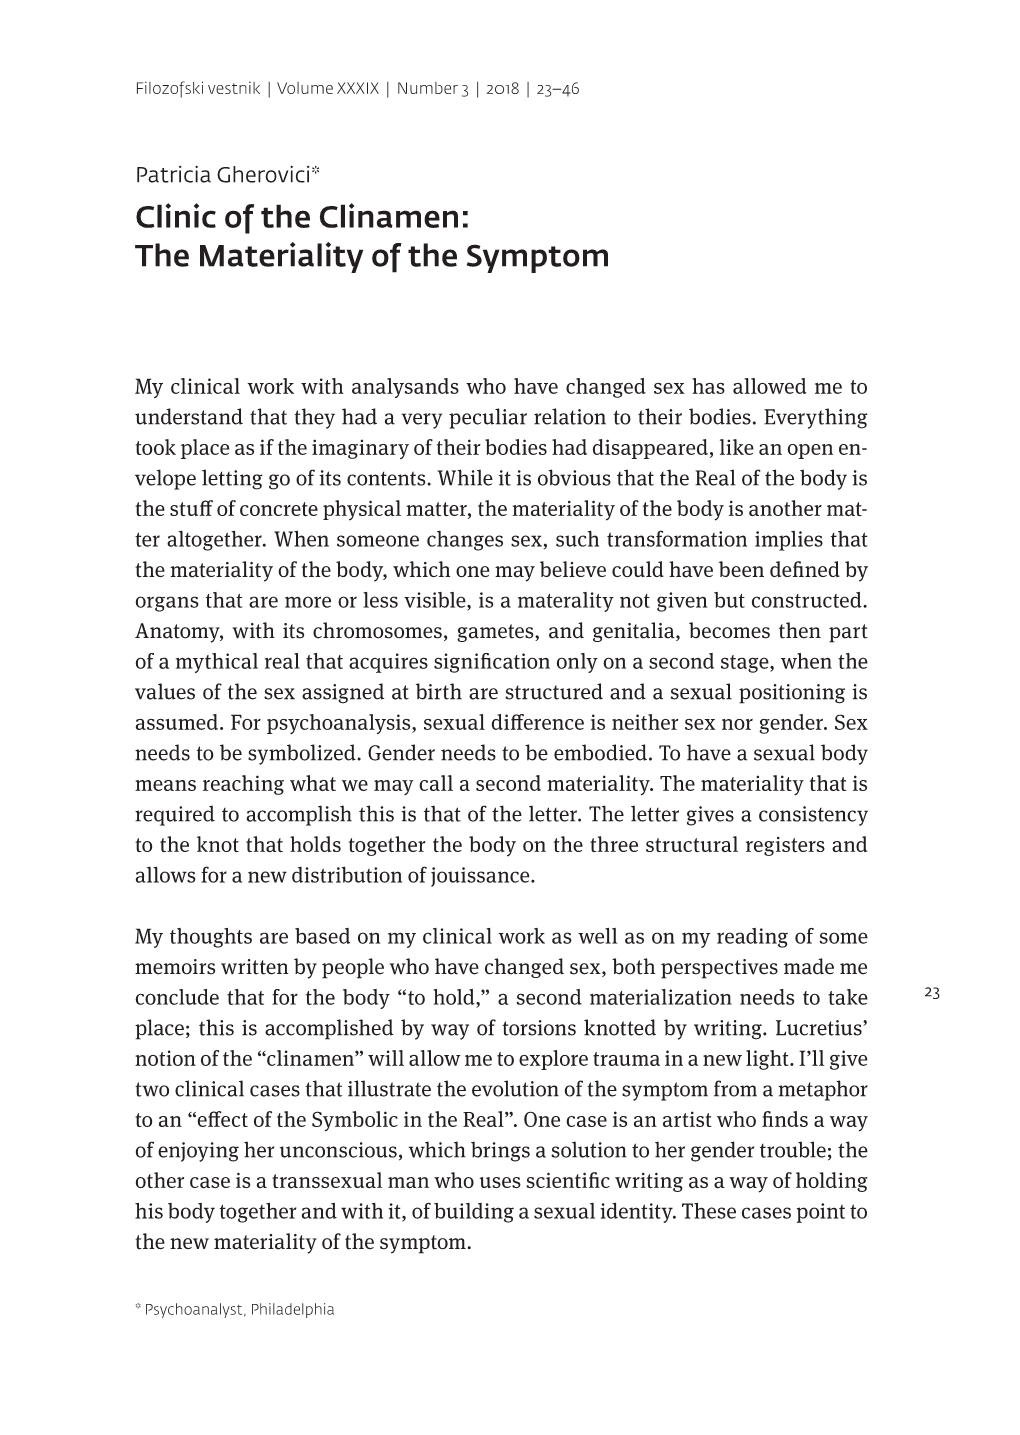 Clinic of the Clinamen: the Materiality of the Symptom